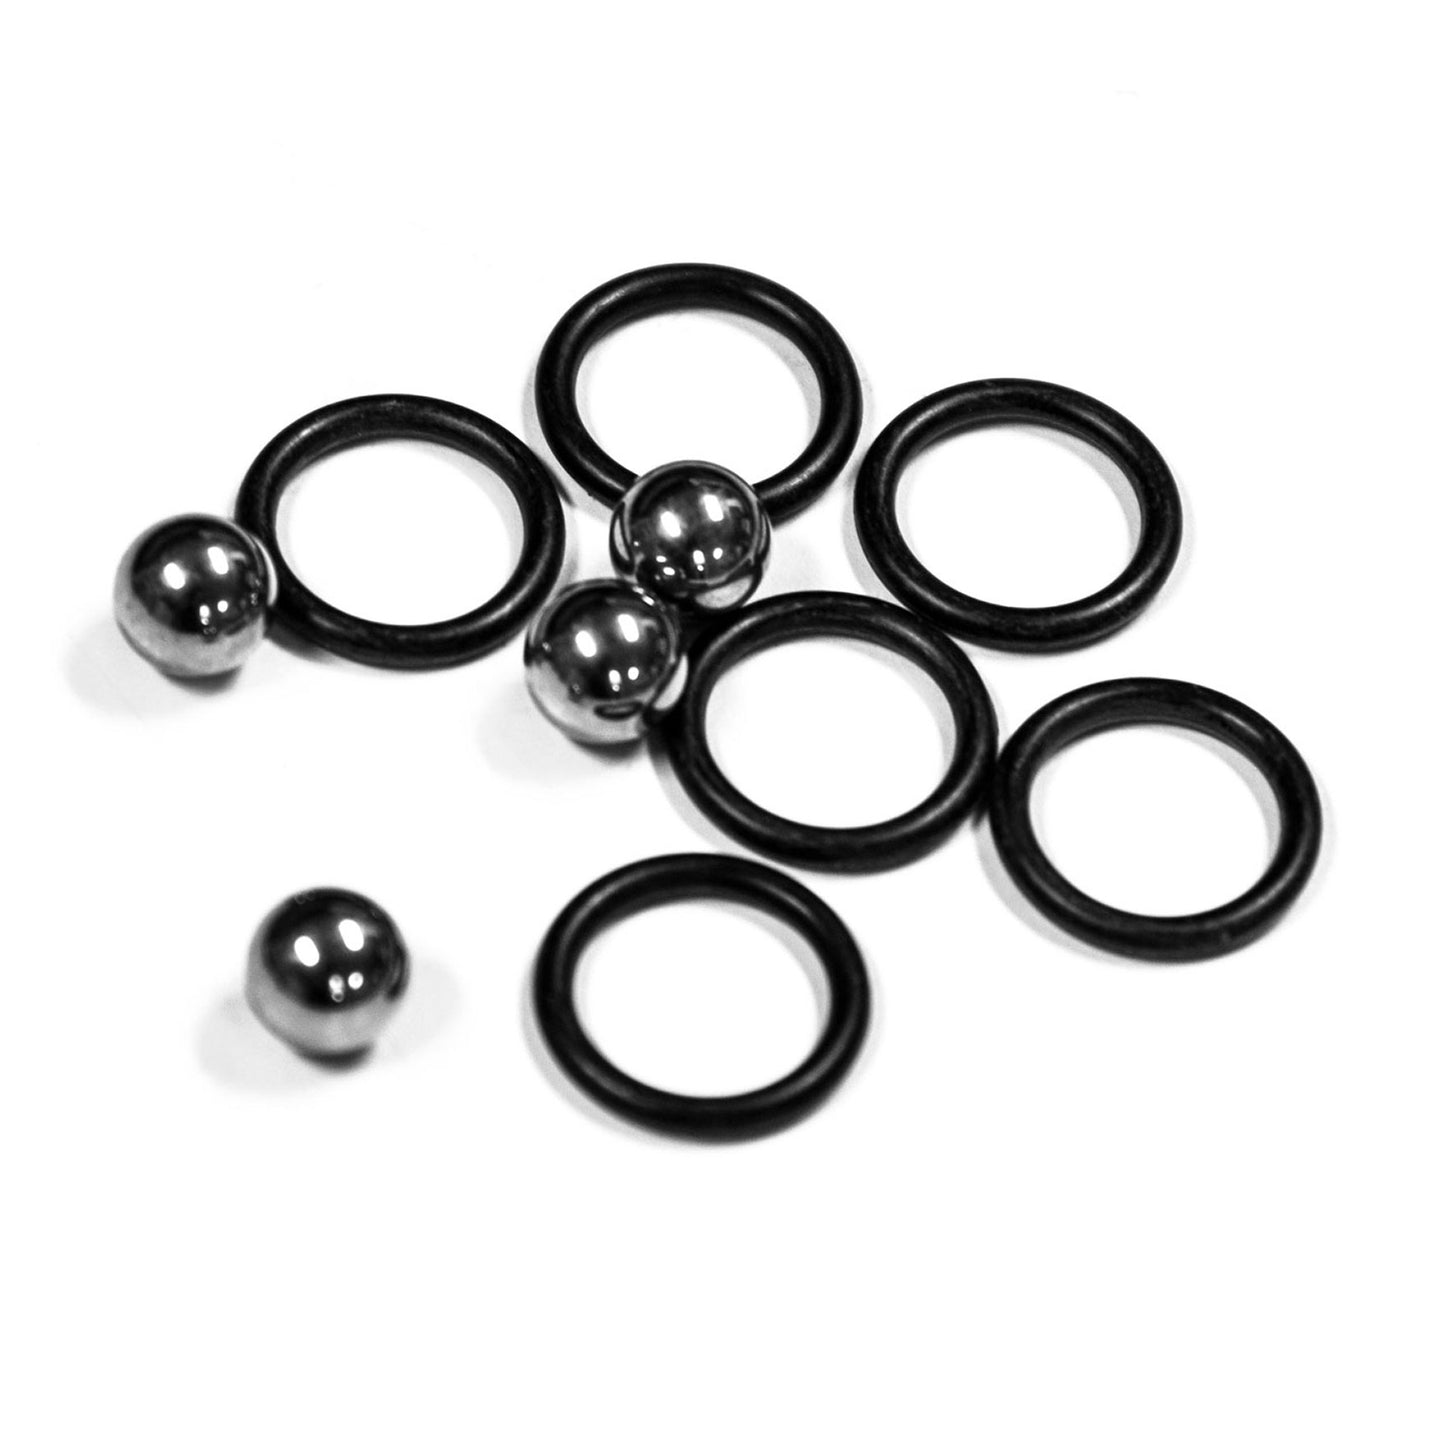 Steel Balls and O-Rings for Ball Lock Bolt